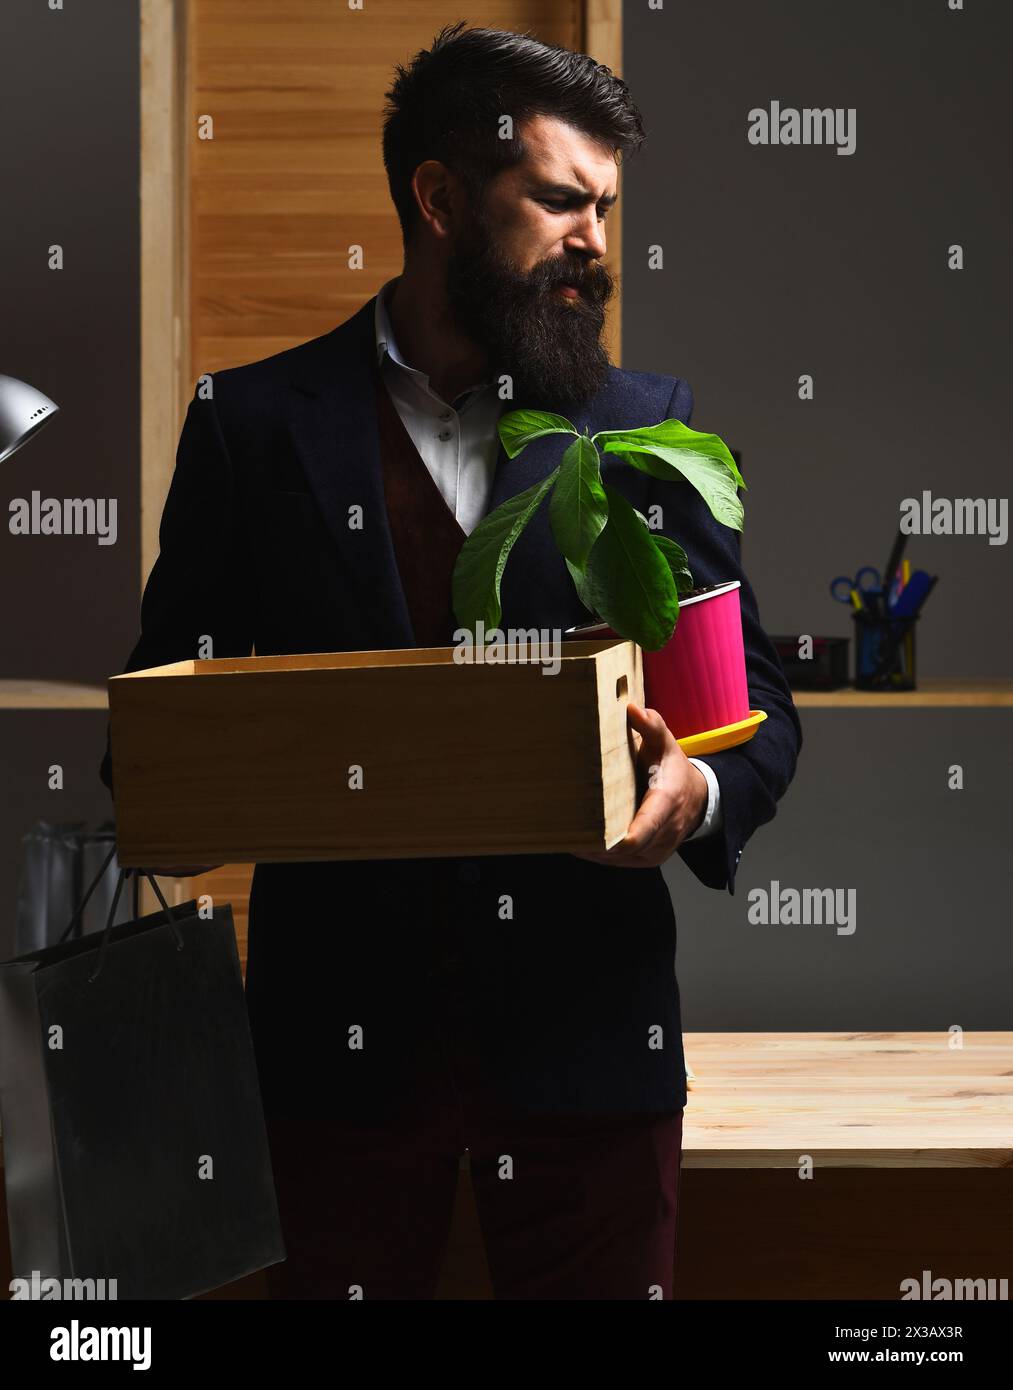 Losing job. Upset office worker is fired. Unemployment. Dismissed employee leaving office with box of his belongings. Sad bearded man in suit with box Stock Photo